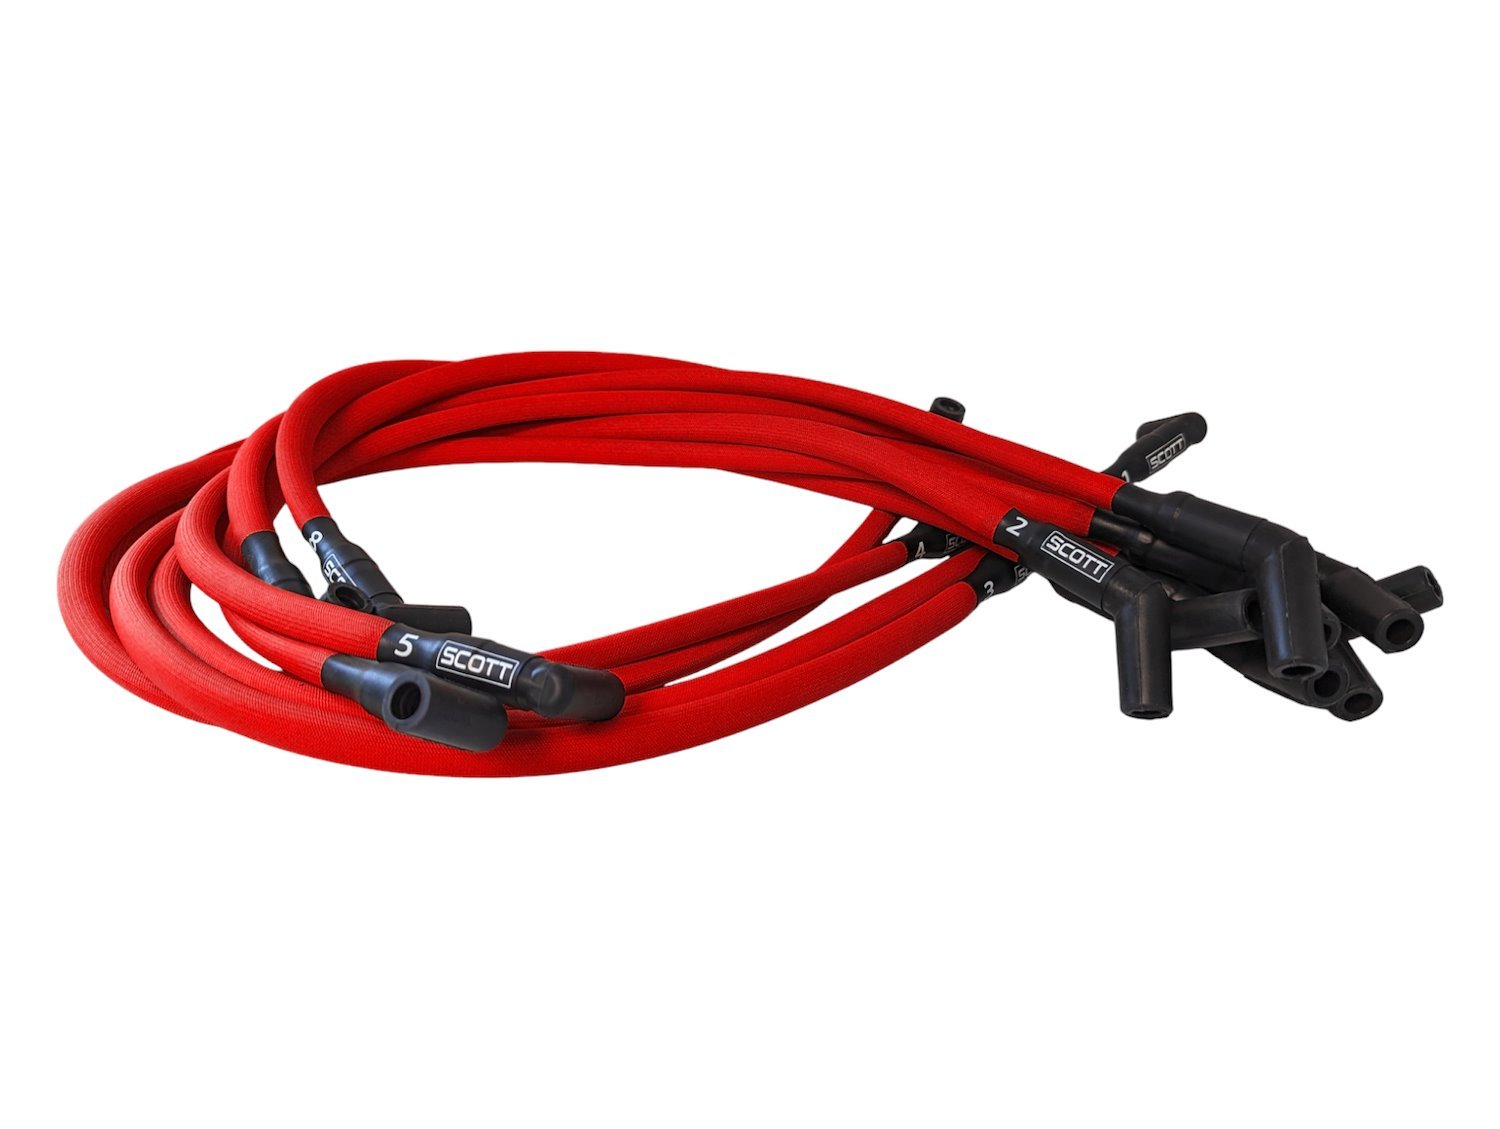 SPW300-PS-426-2 Super Mag Fiberglass-Oversleeved Spark Plug Wire Set for Small Block Ford, Over Valve Cover [Red]